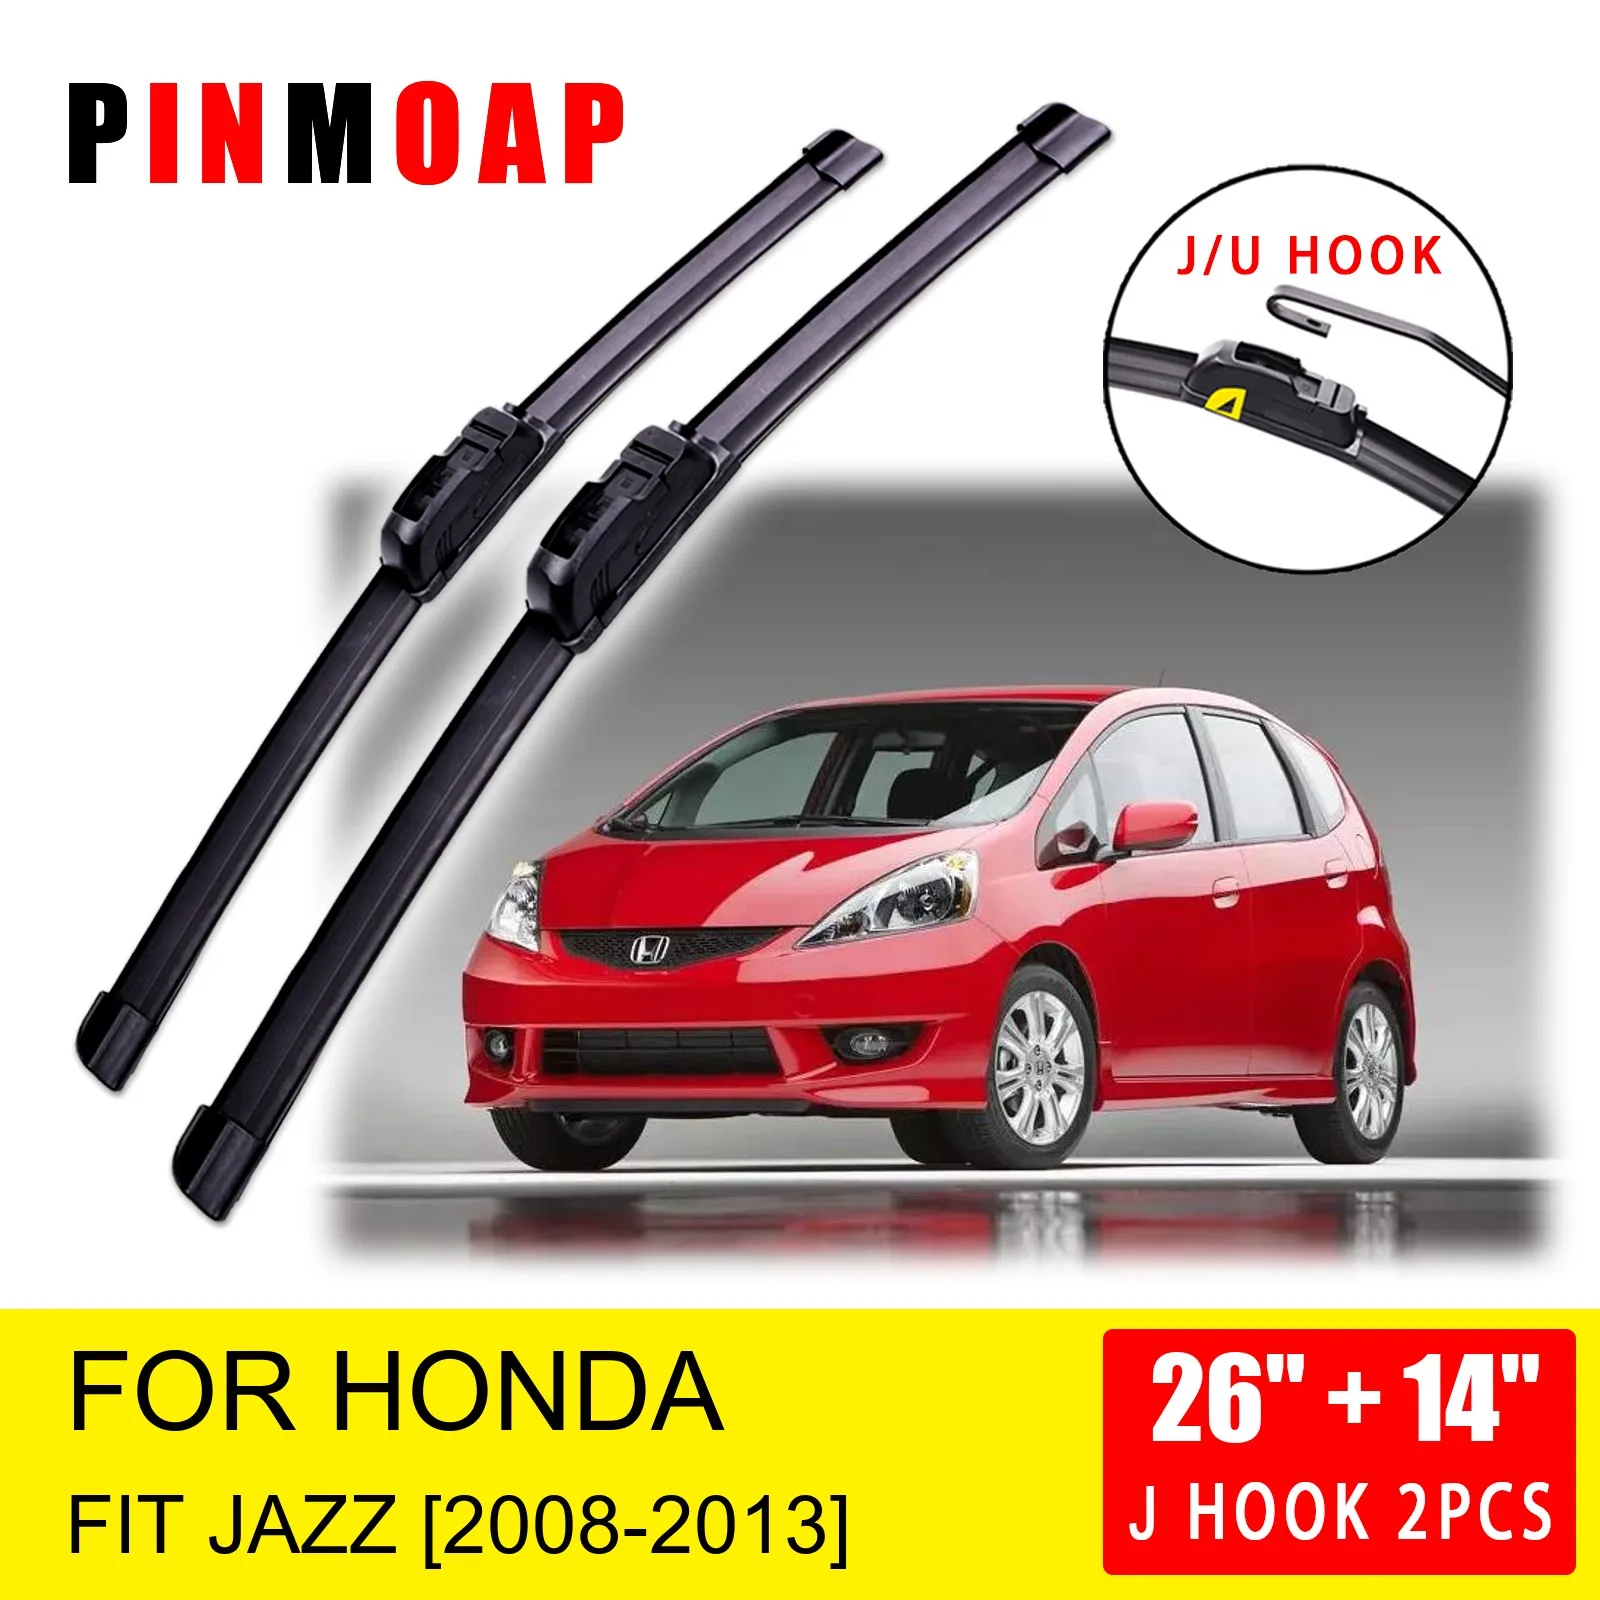 For Honda Fit Jazz 2008 2009 2010 2011 2012 2013 Front Wiper Blades Brushes Cutter Accessories   U J Hook